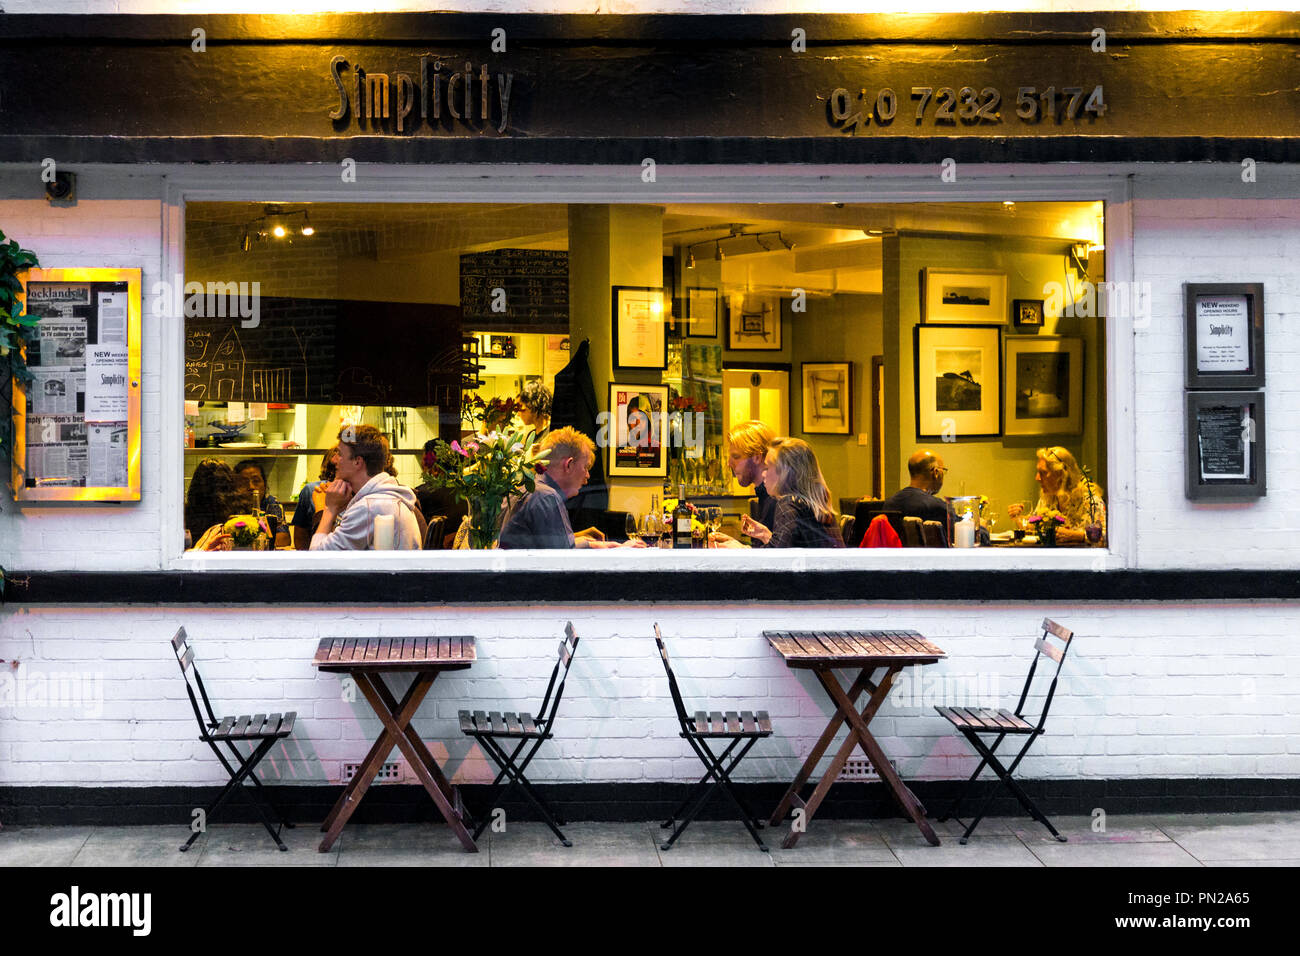 People dining at a restaurant with large window, Simplicity Restaurant in Rotherhithe, London, UK Stock Photo